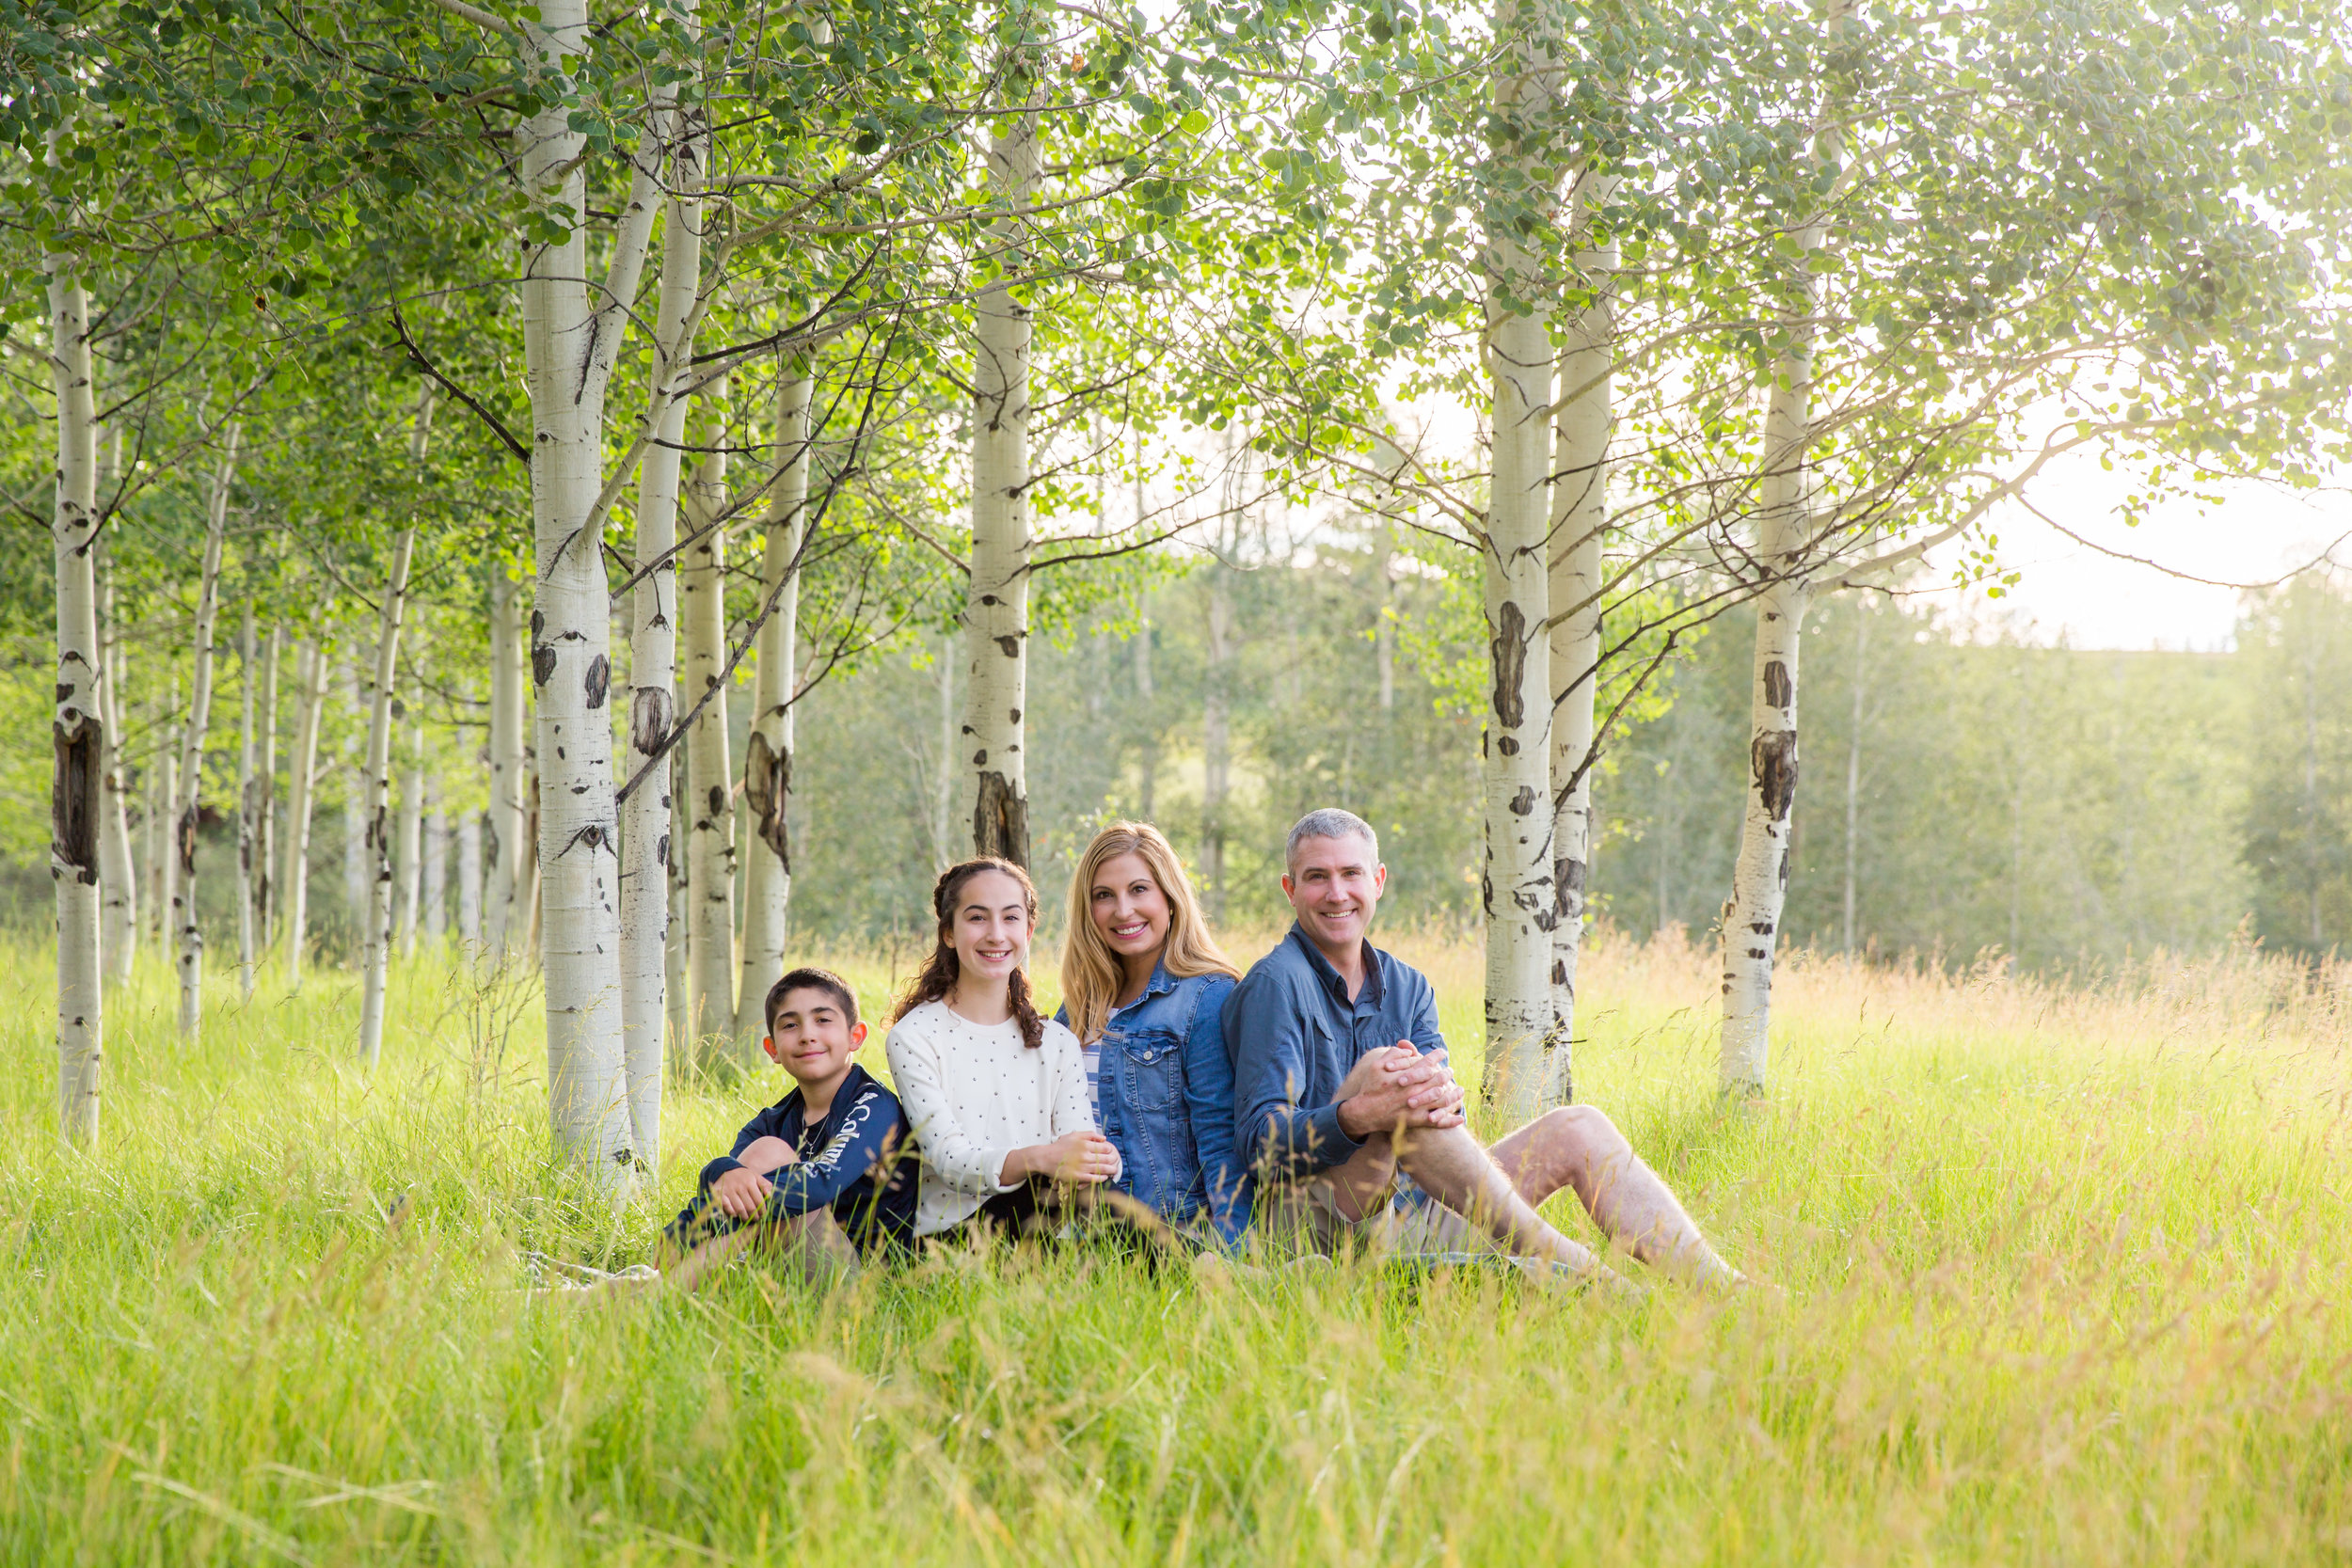 Telluride Family Photography - Summer 2